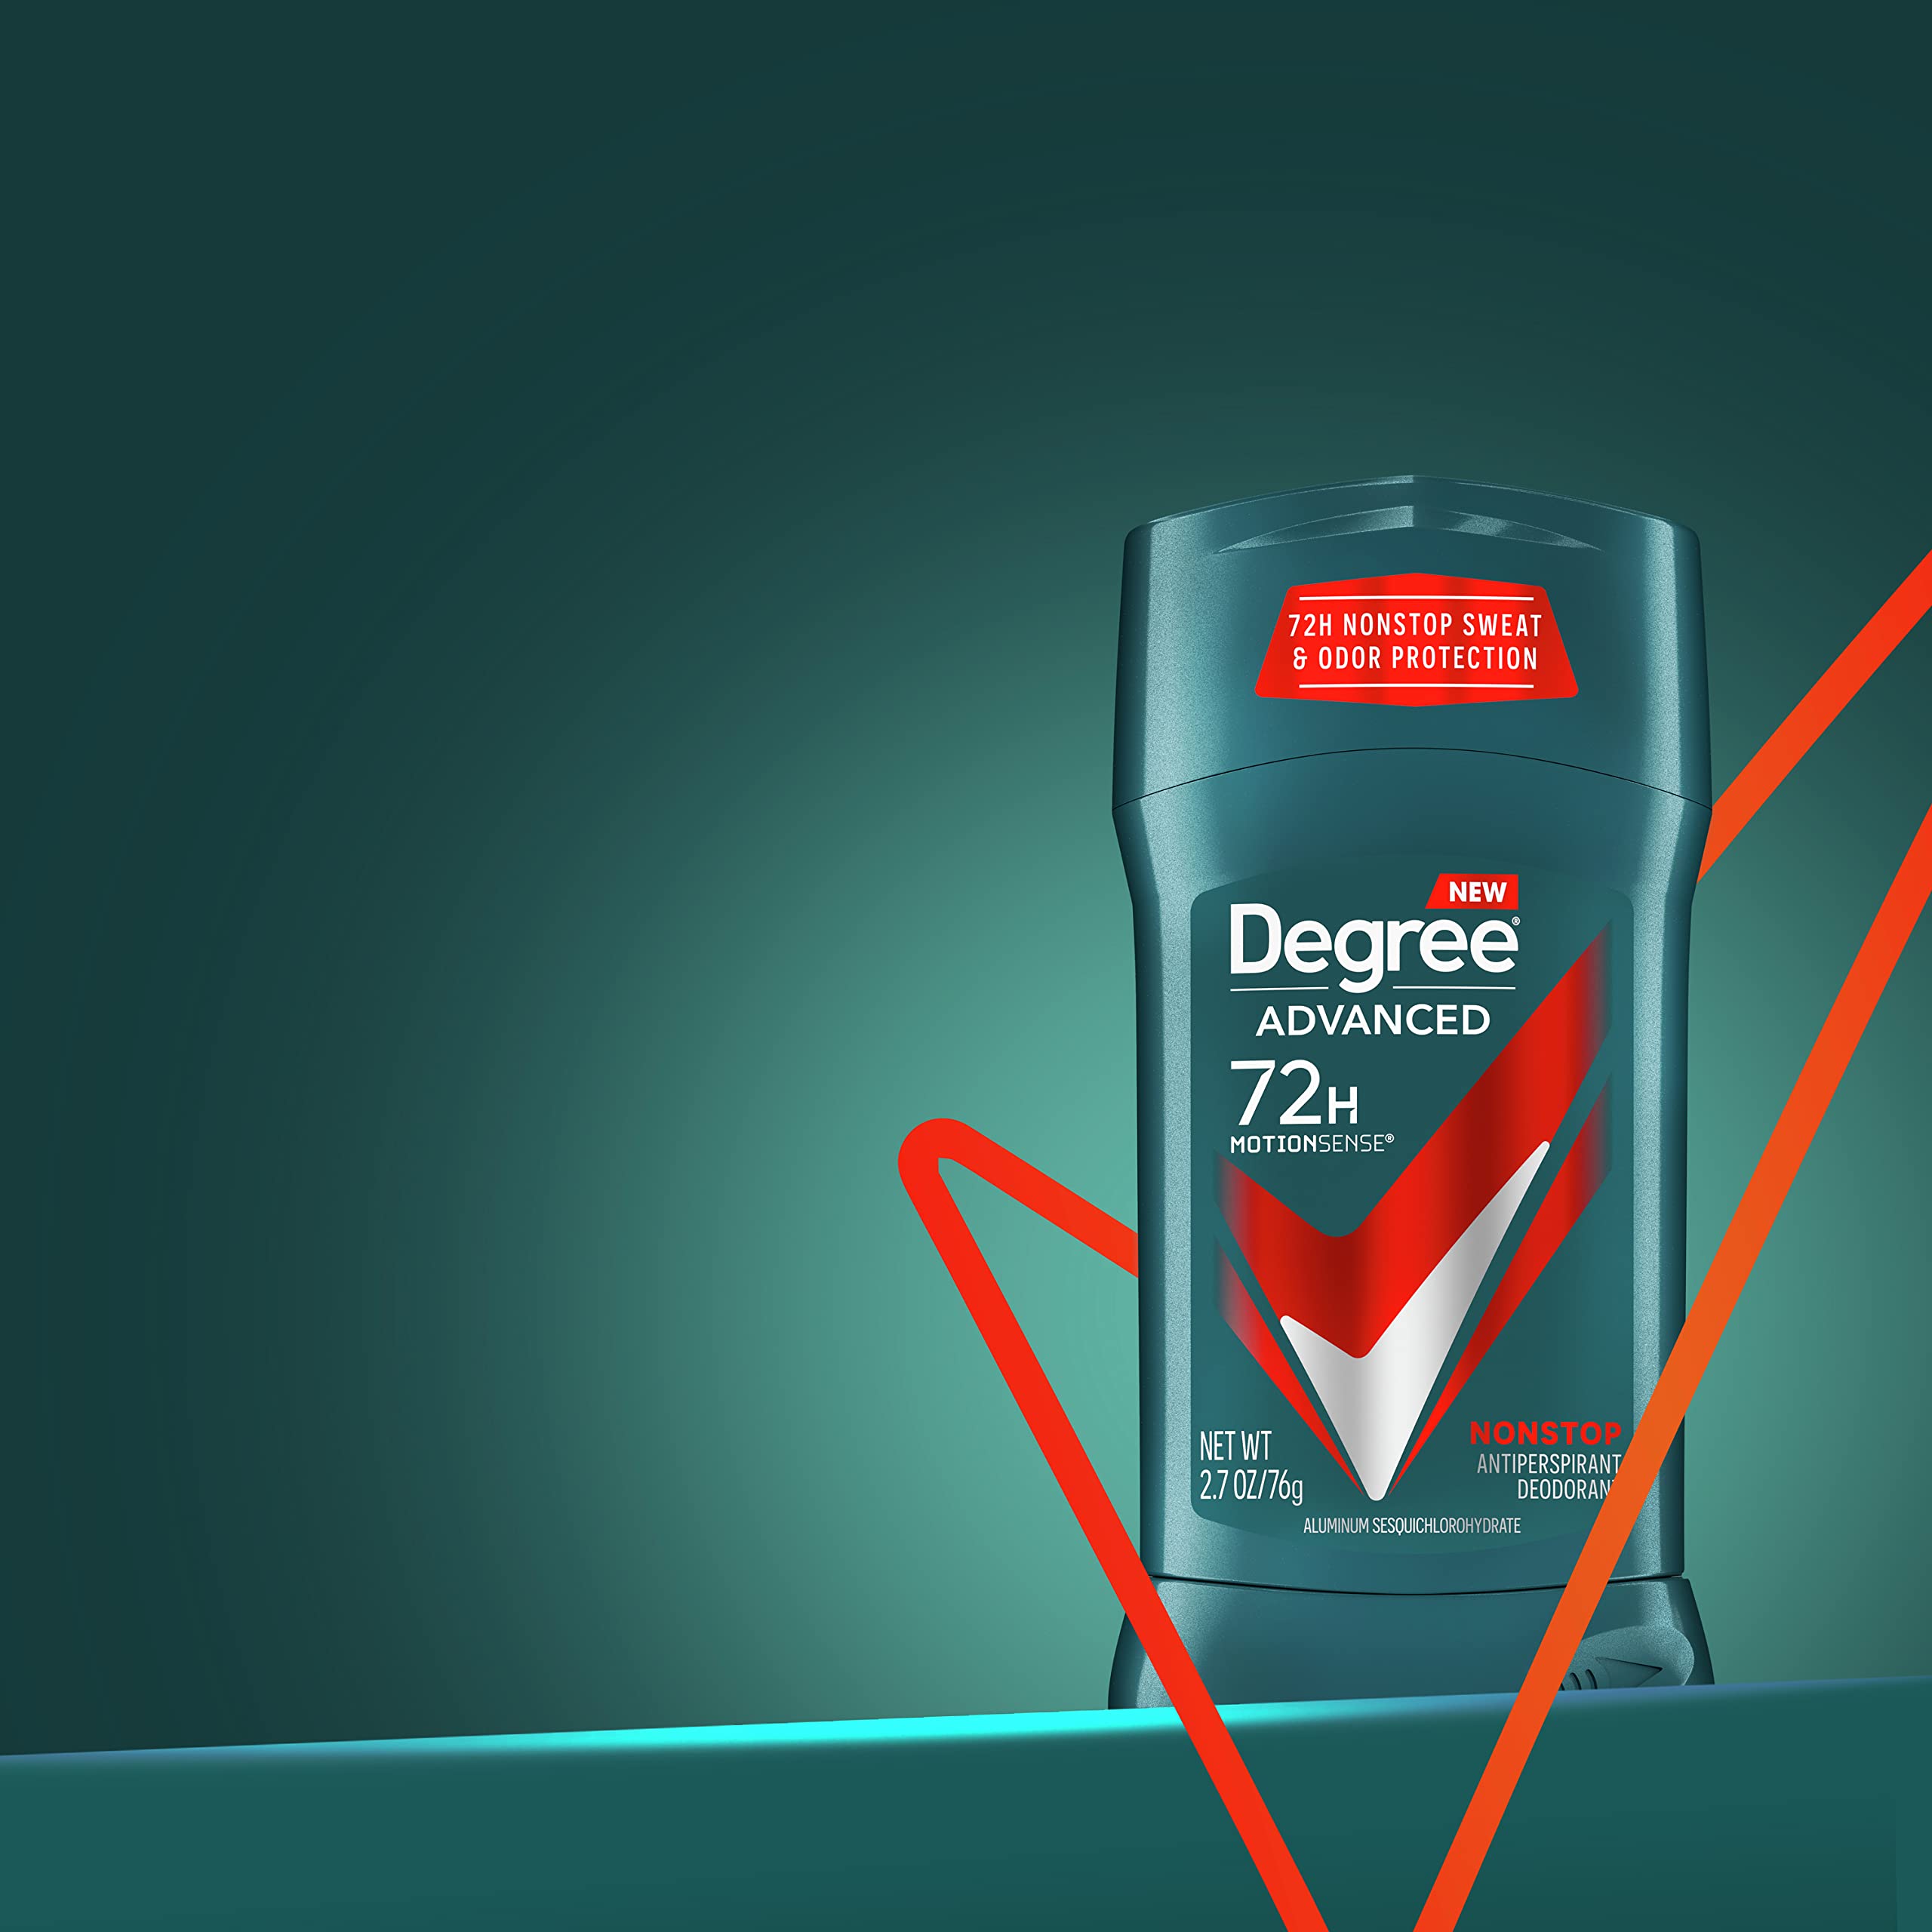 Degree Men Advanced Antiperspirant Deodorant 72H Sweat and Odor Protection Nonstop Claim: Deodorant For Men With MotionSense Technology 2.7 oz 4 Count